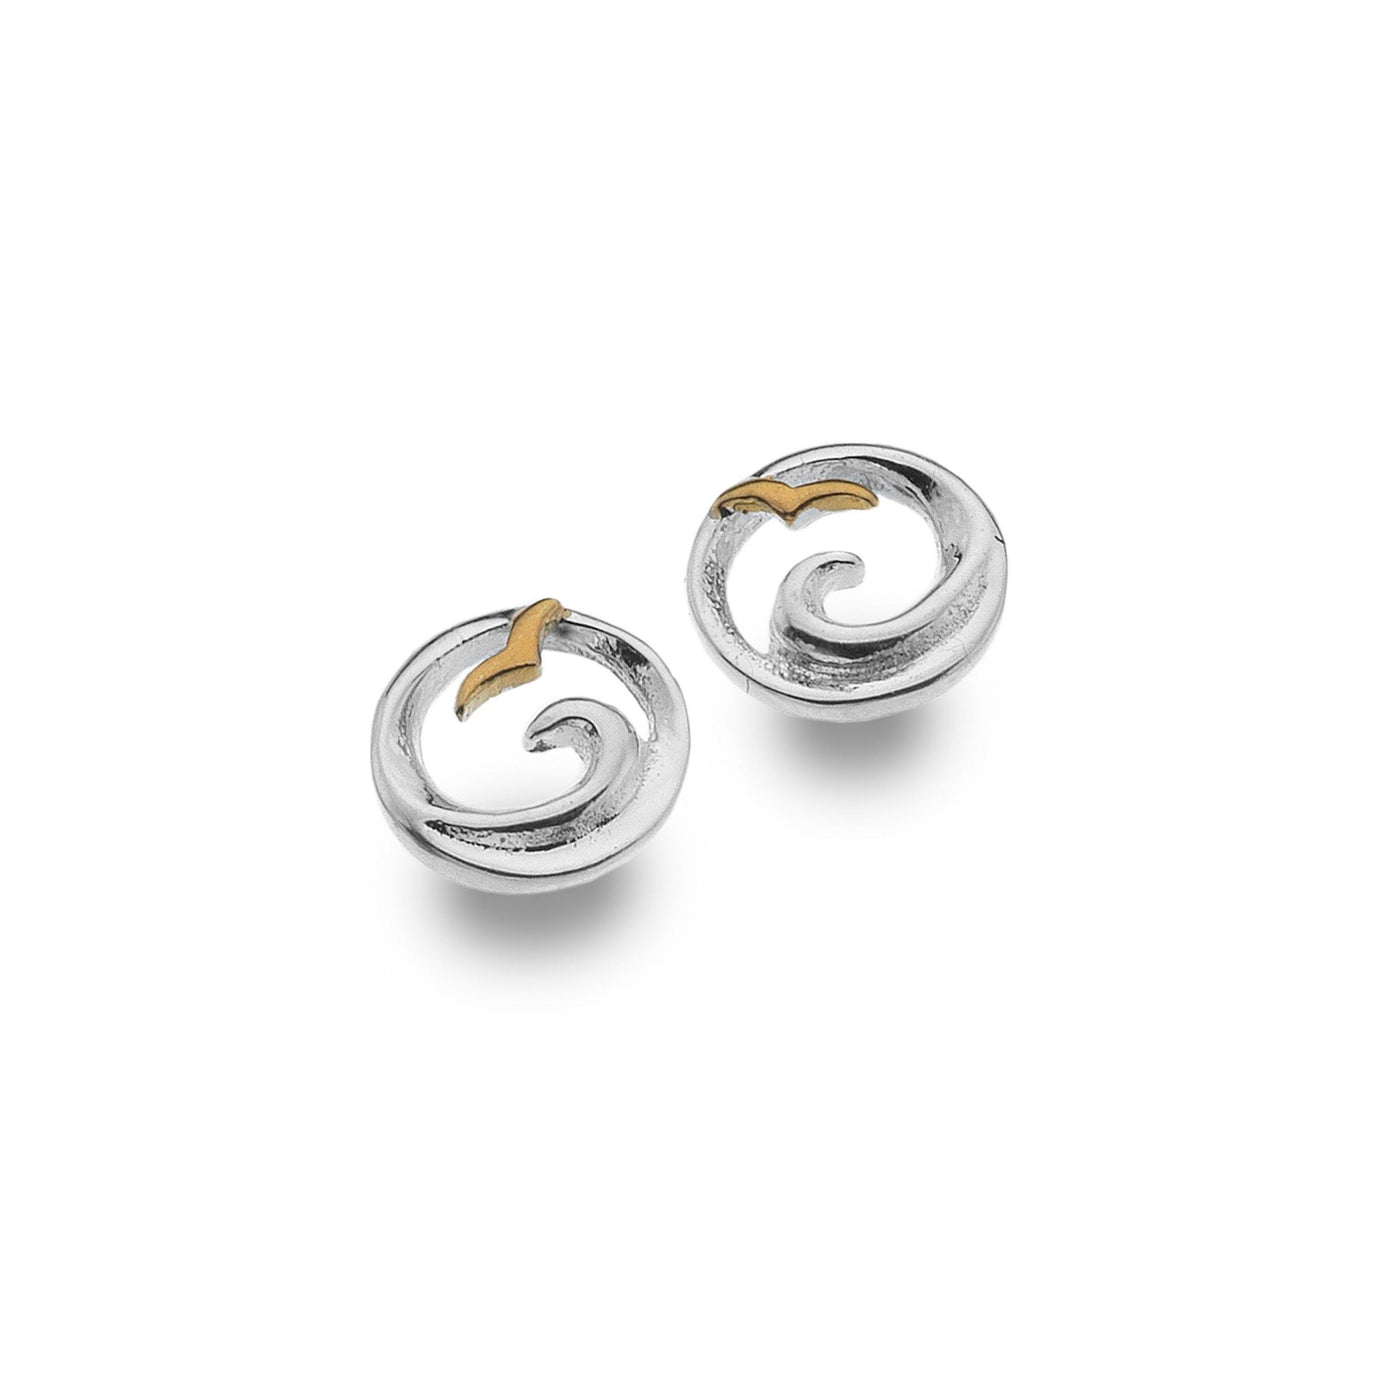 Seagull and Wave Stud Earrings - Rococo Jewellery